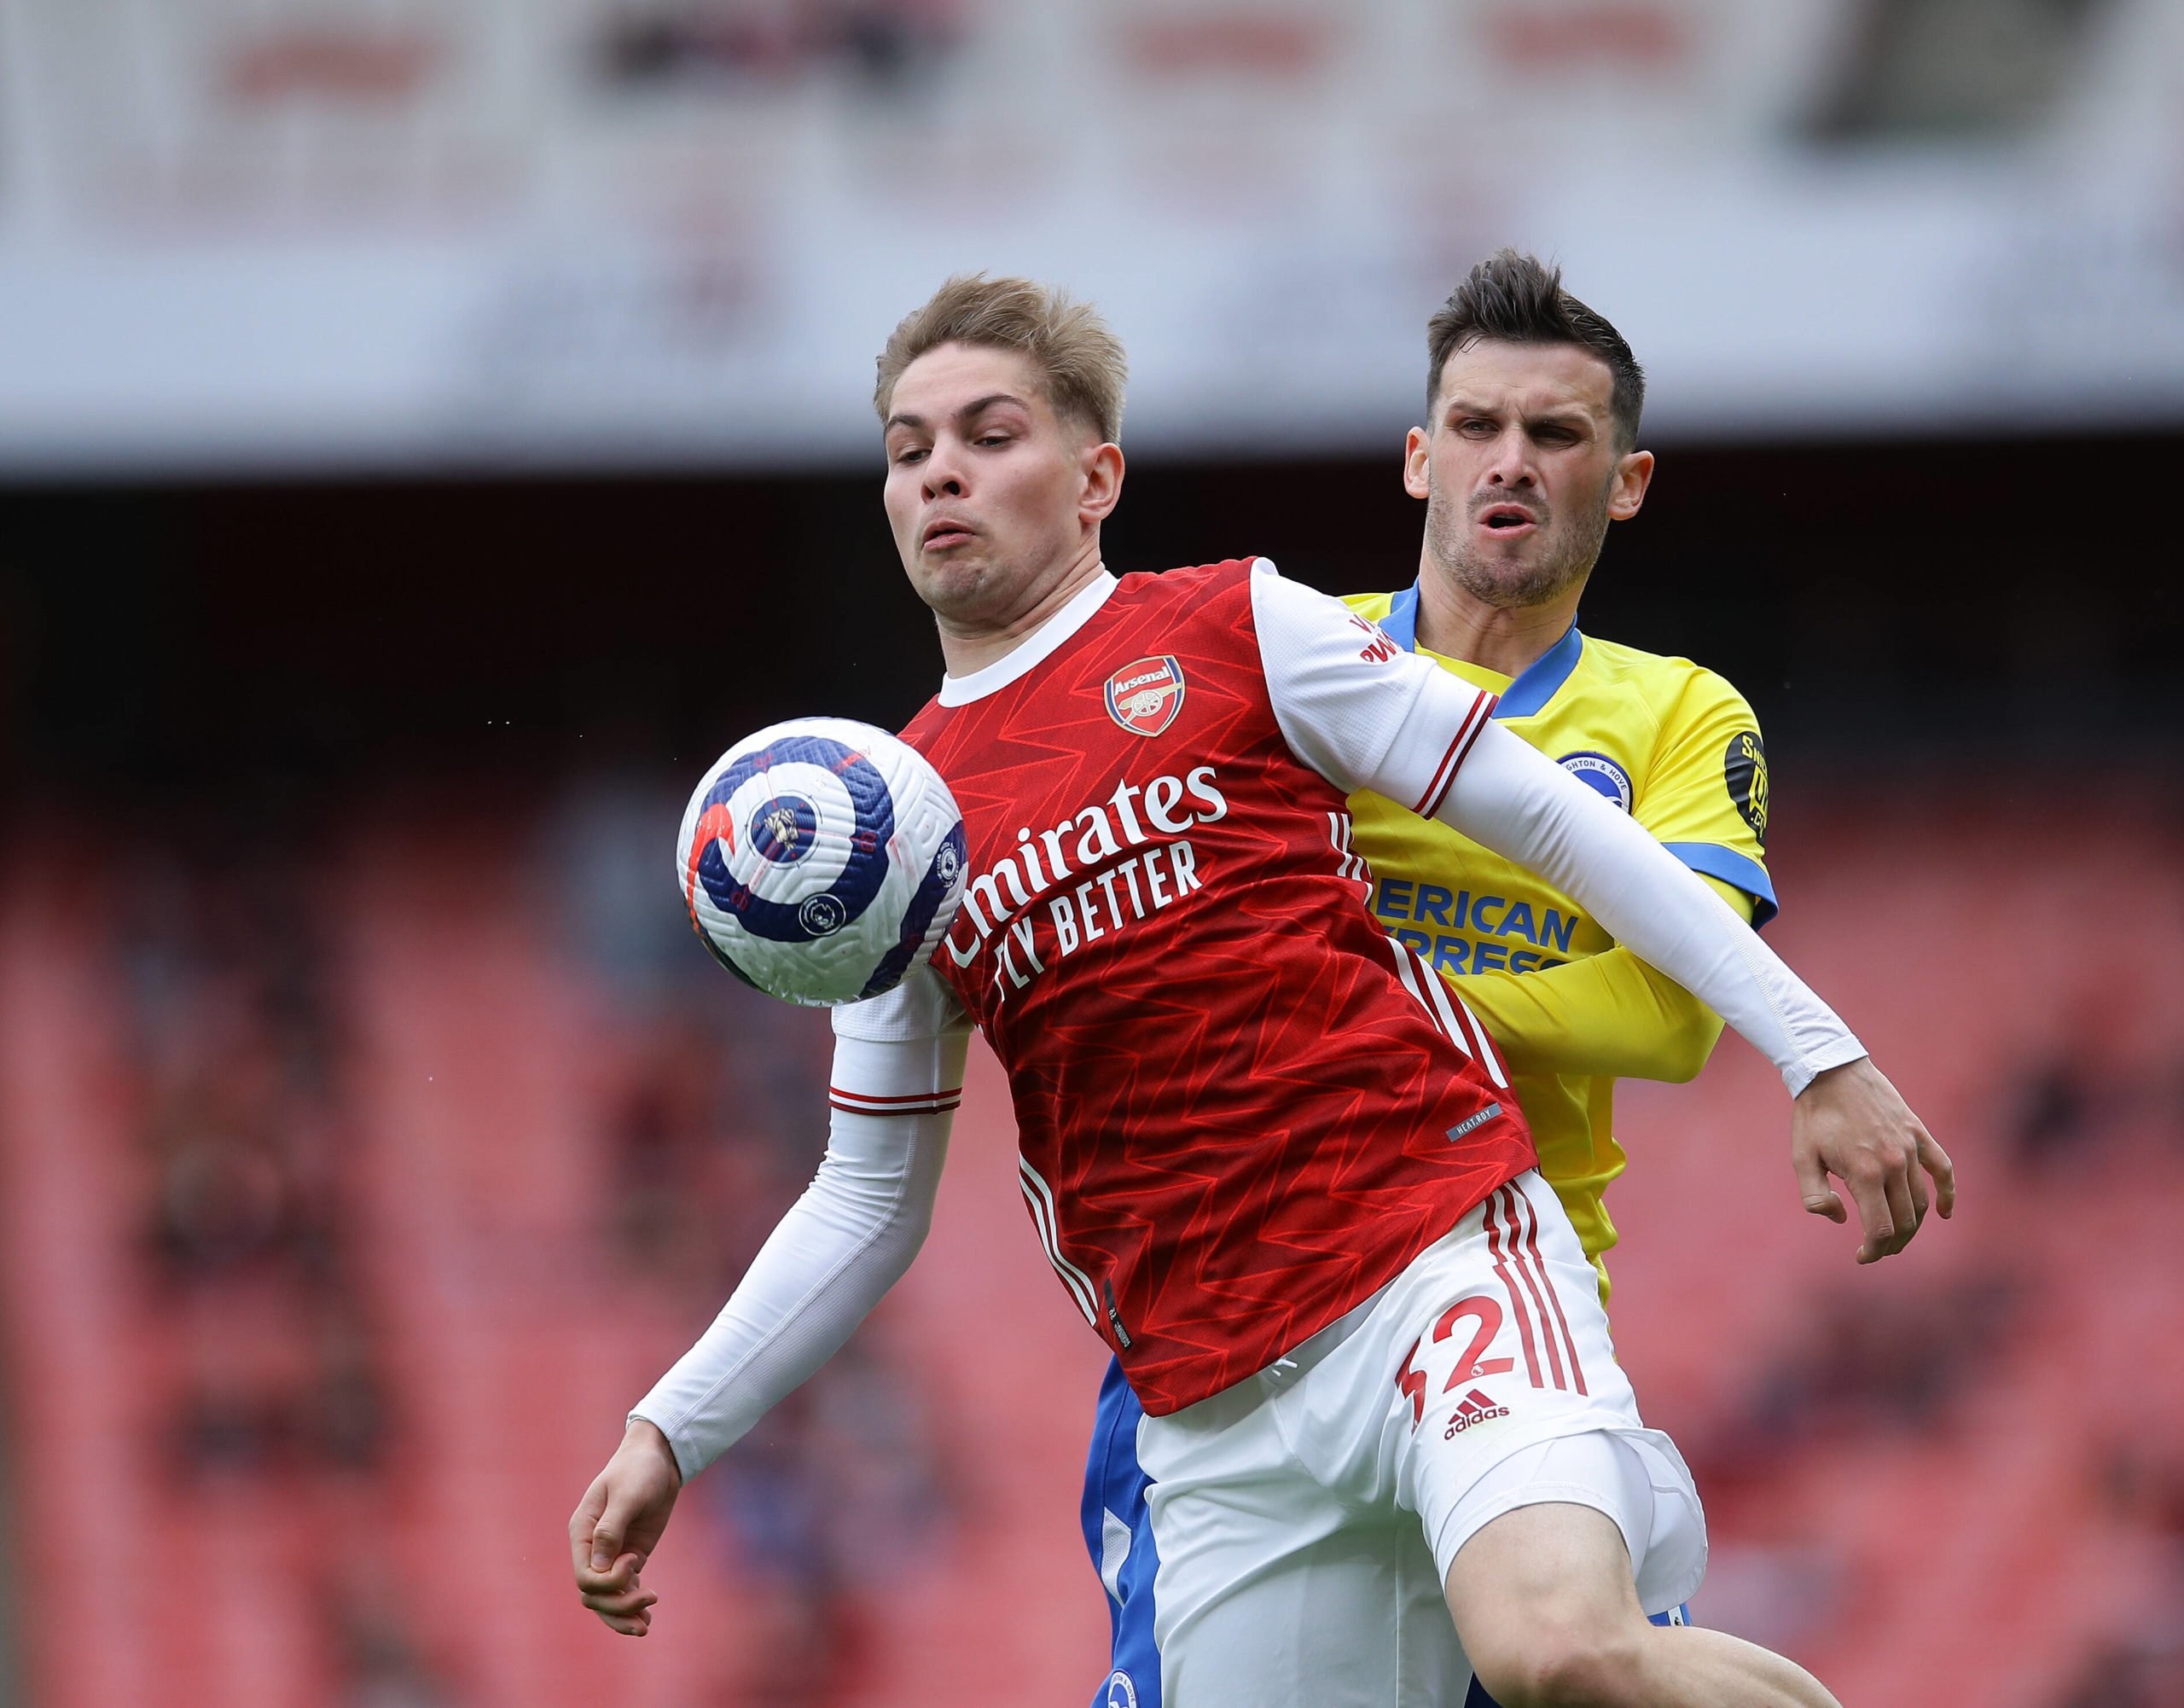 Aston Villa lining up a third bid for Smith Rowe who is seen in the picture